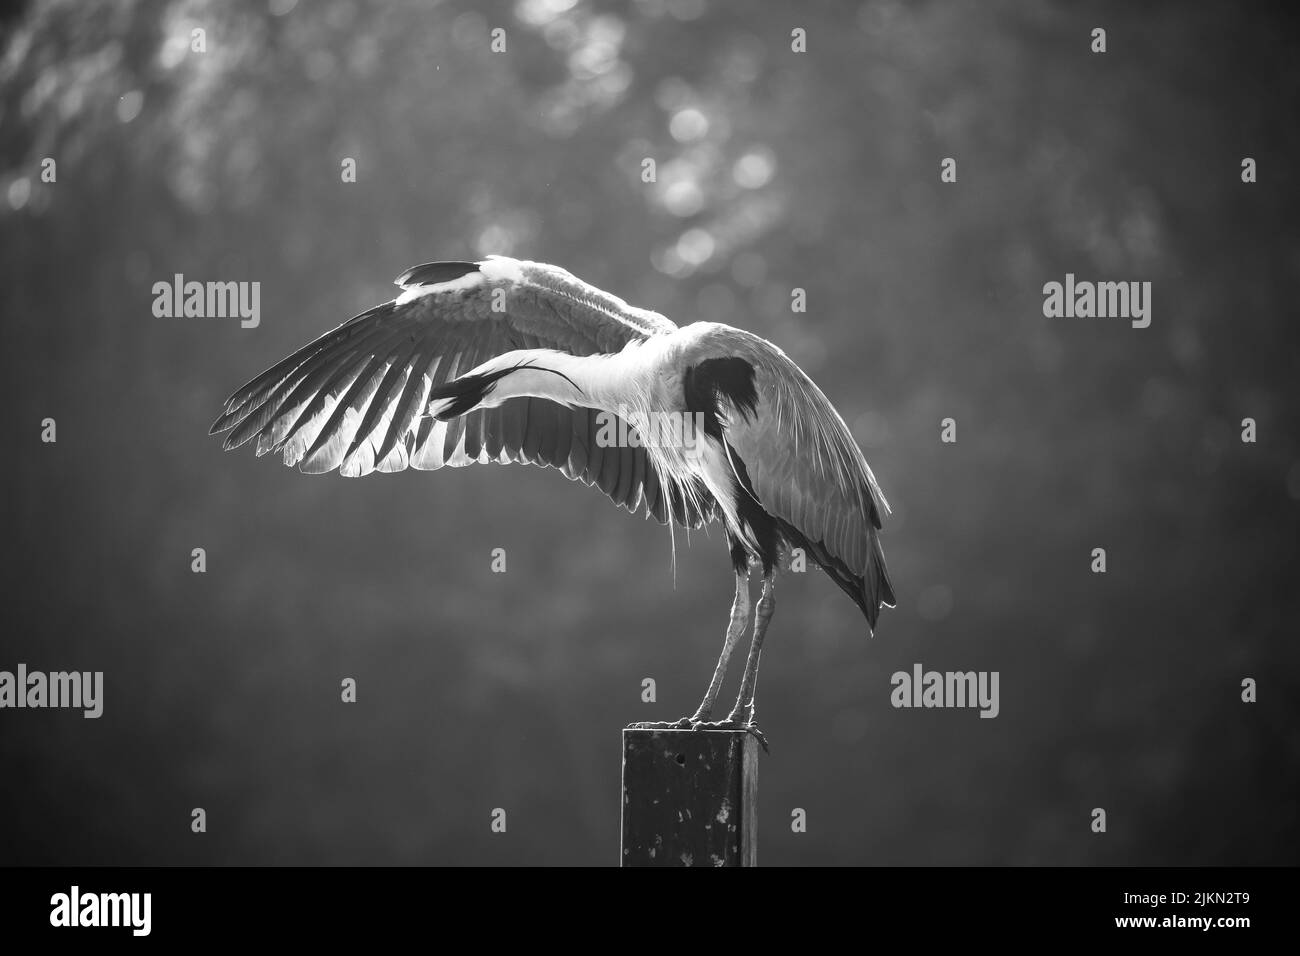 A closeup shot of a gray heron stretching and looking under the feathers on blurred background Stock Photo